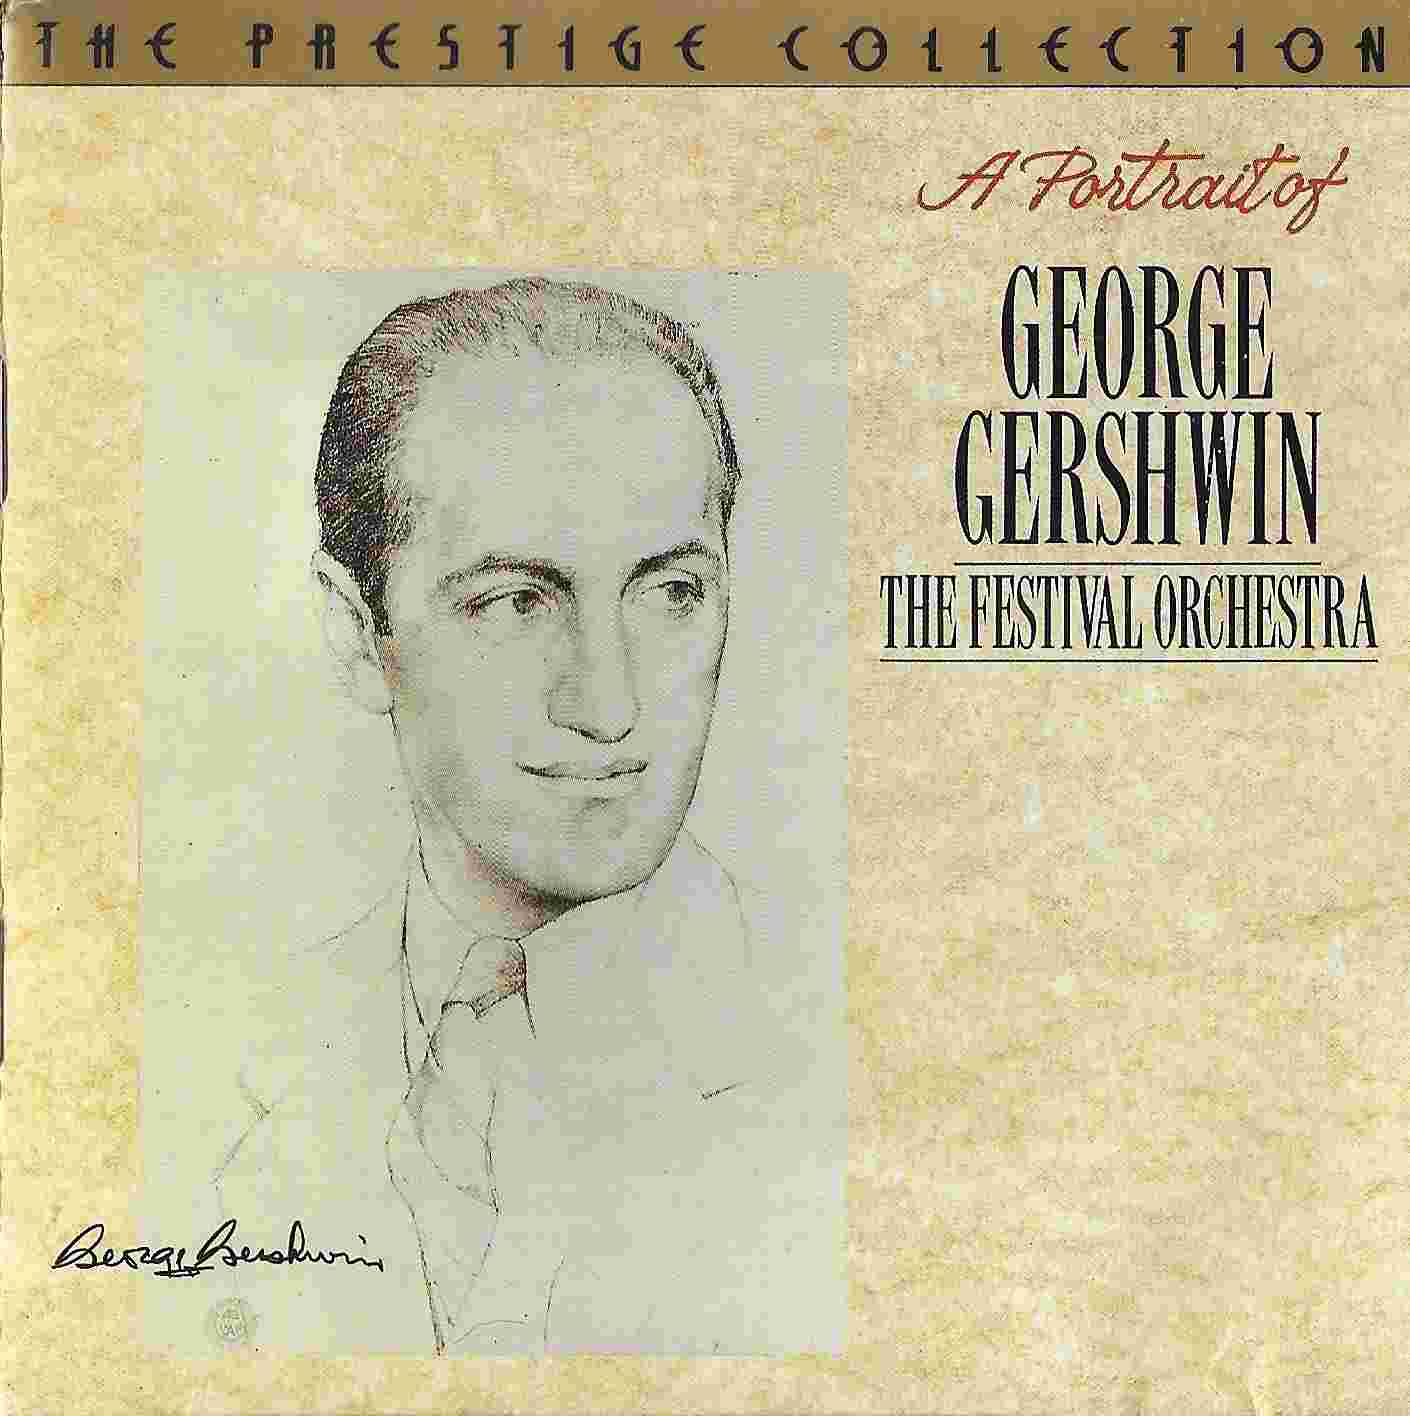 Picture of CDPC 5010 A portrait of George Gershwin by artist George Gershwin from the BBC cds - Records and Tapes library